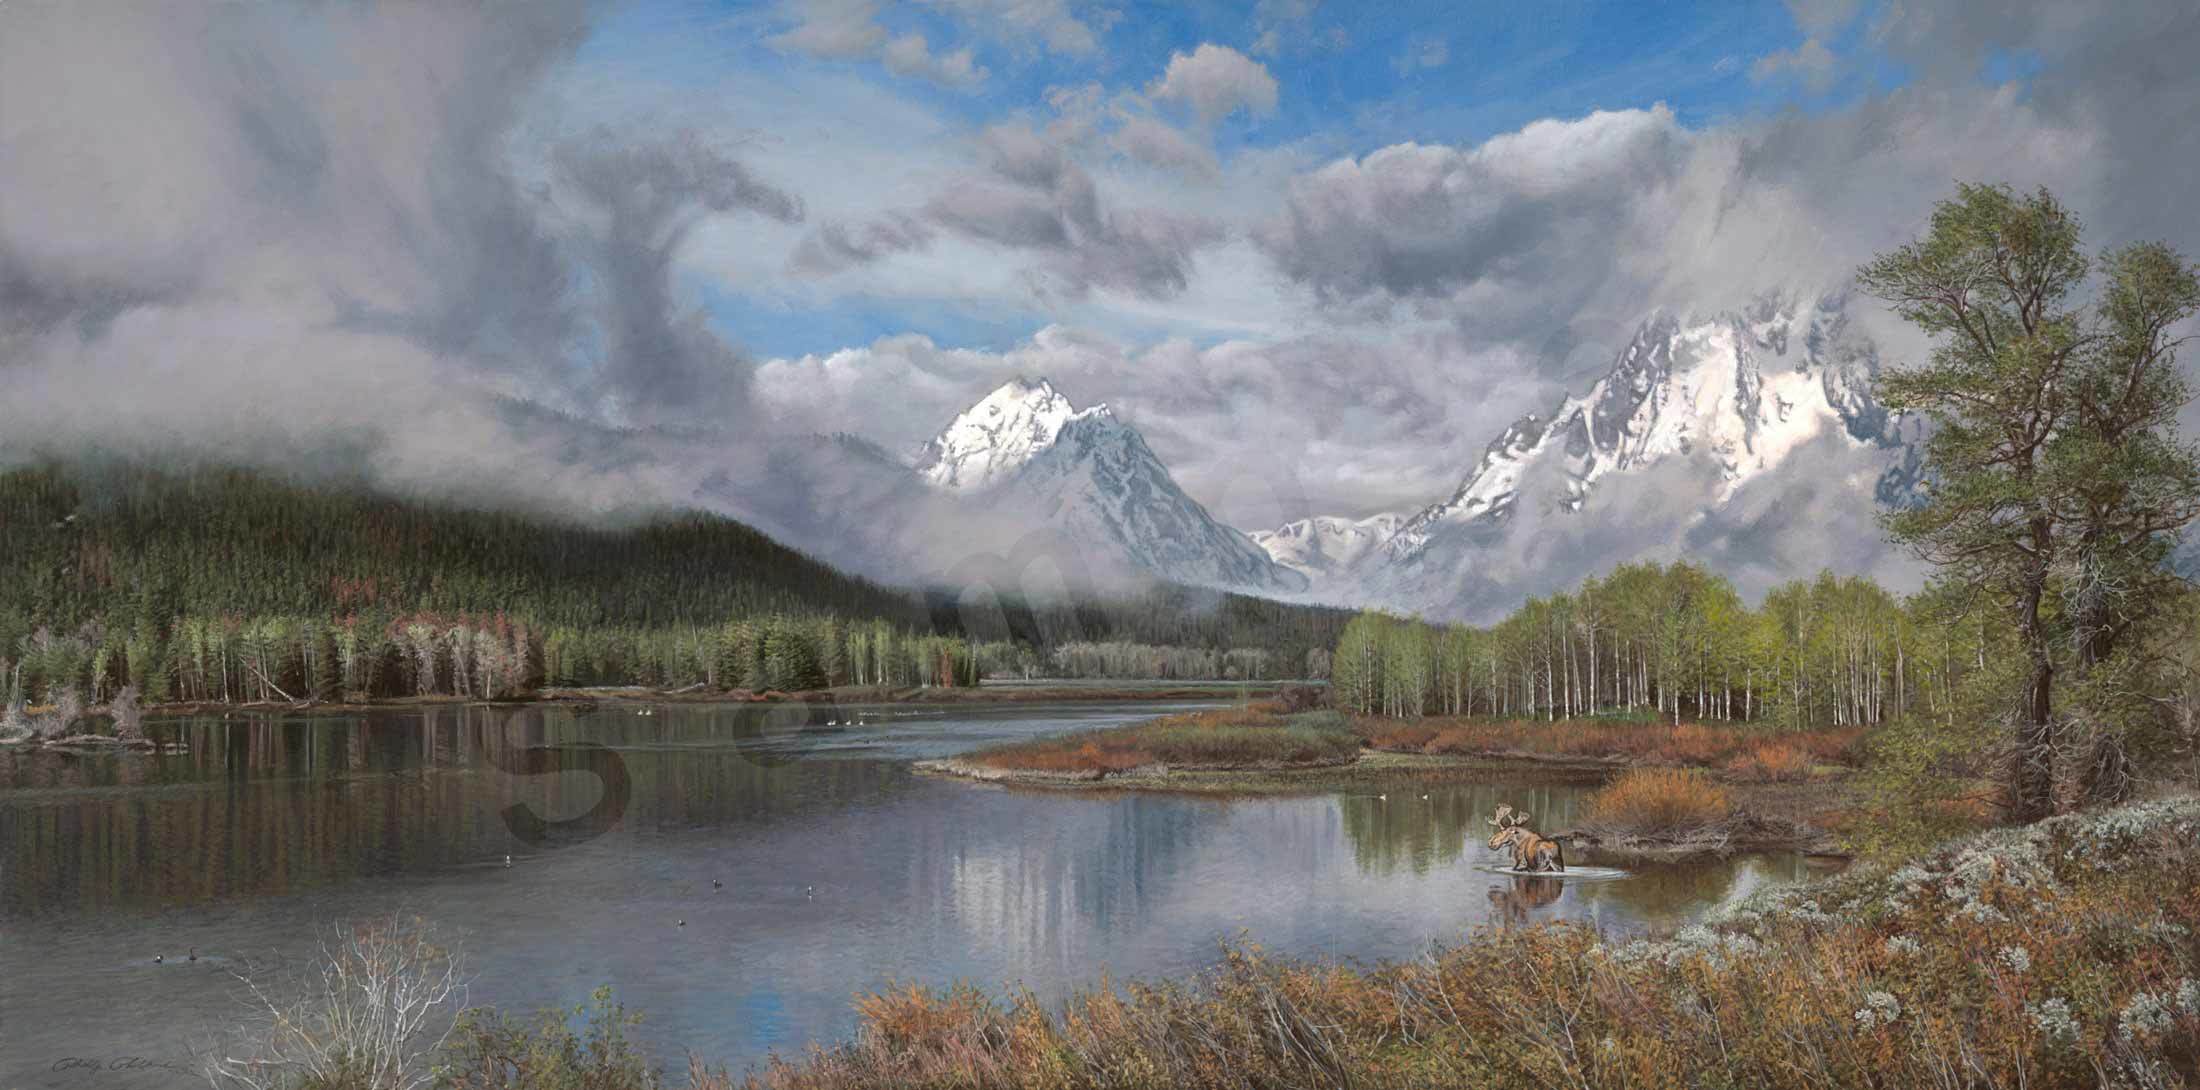 The oxbow bend q0t8w2